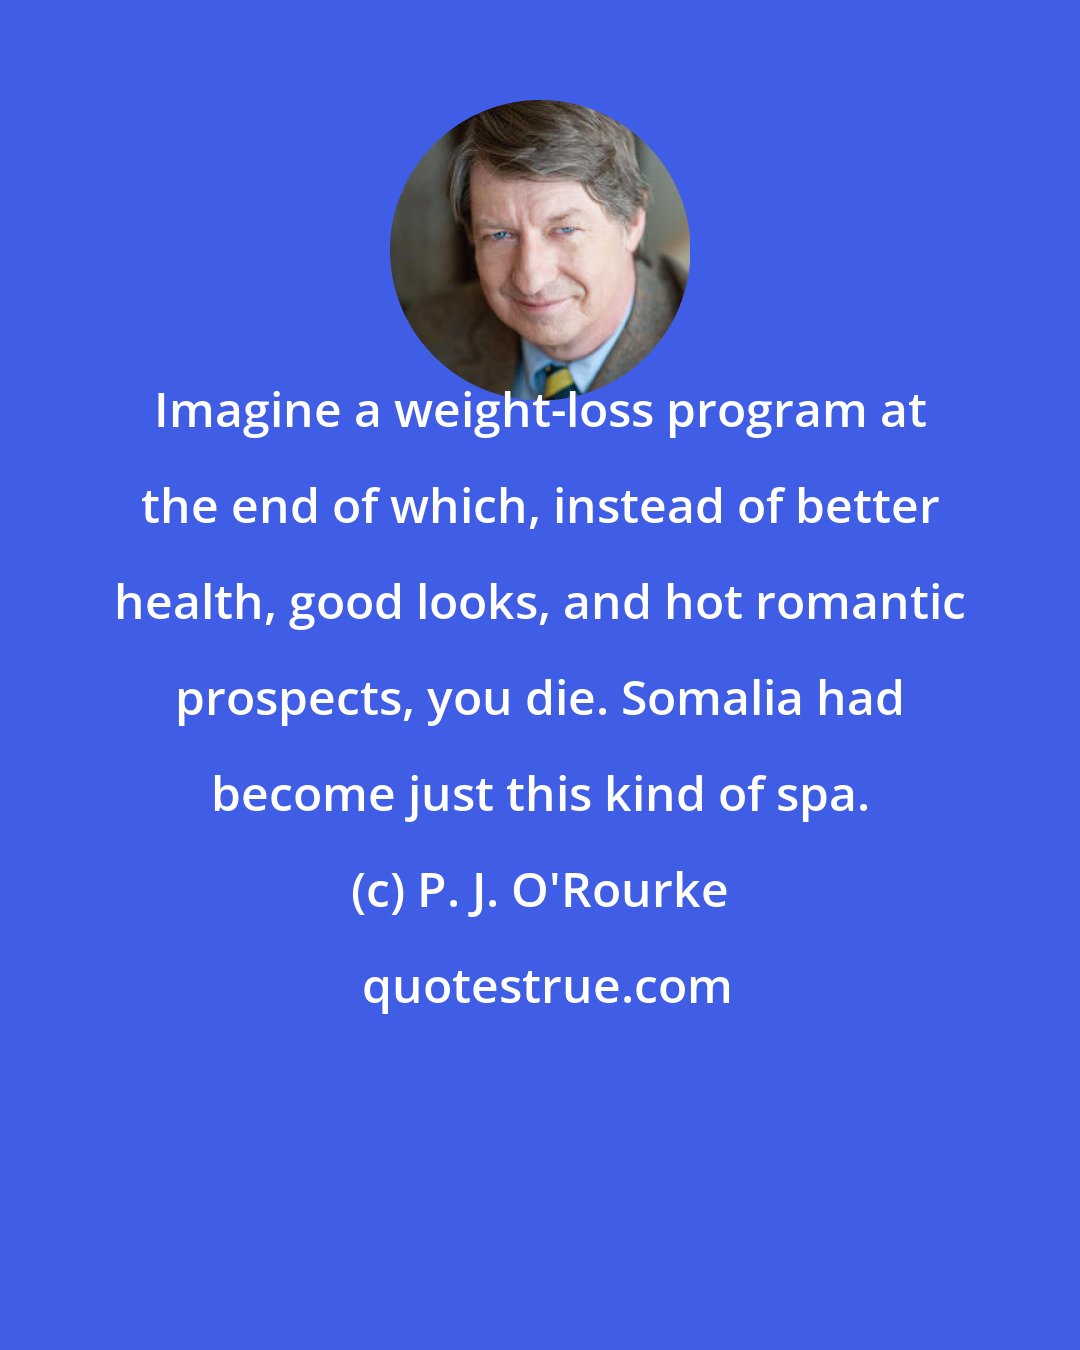 P. J. O'Rourke: Imagine a weight-loss program at the end of which, instead of better health, good looks, and hot romantic prospects, you die. Somalia had become just this kind of spa.